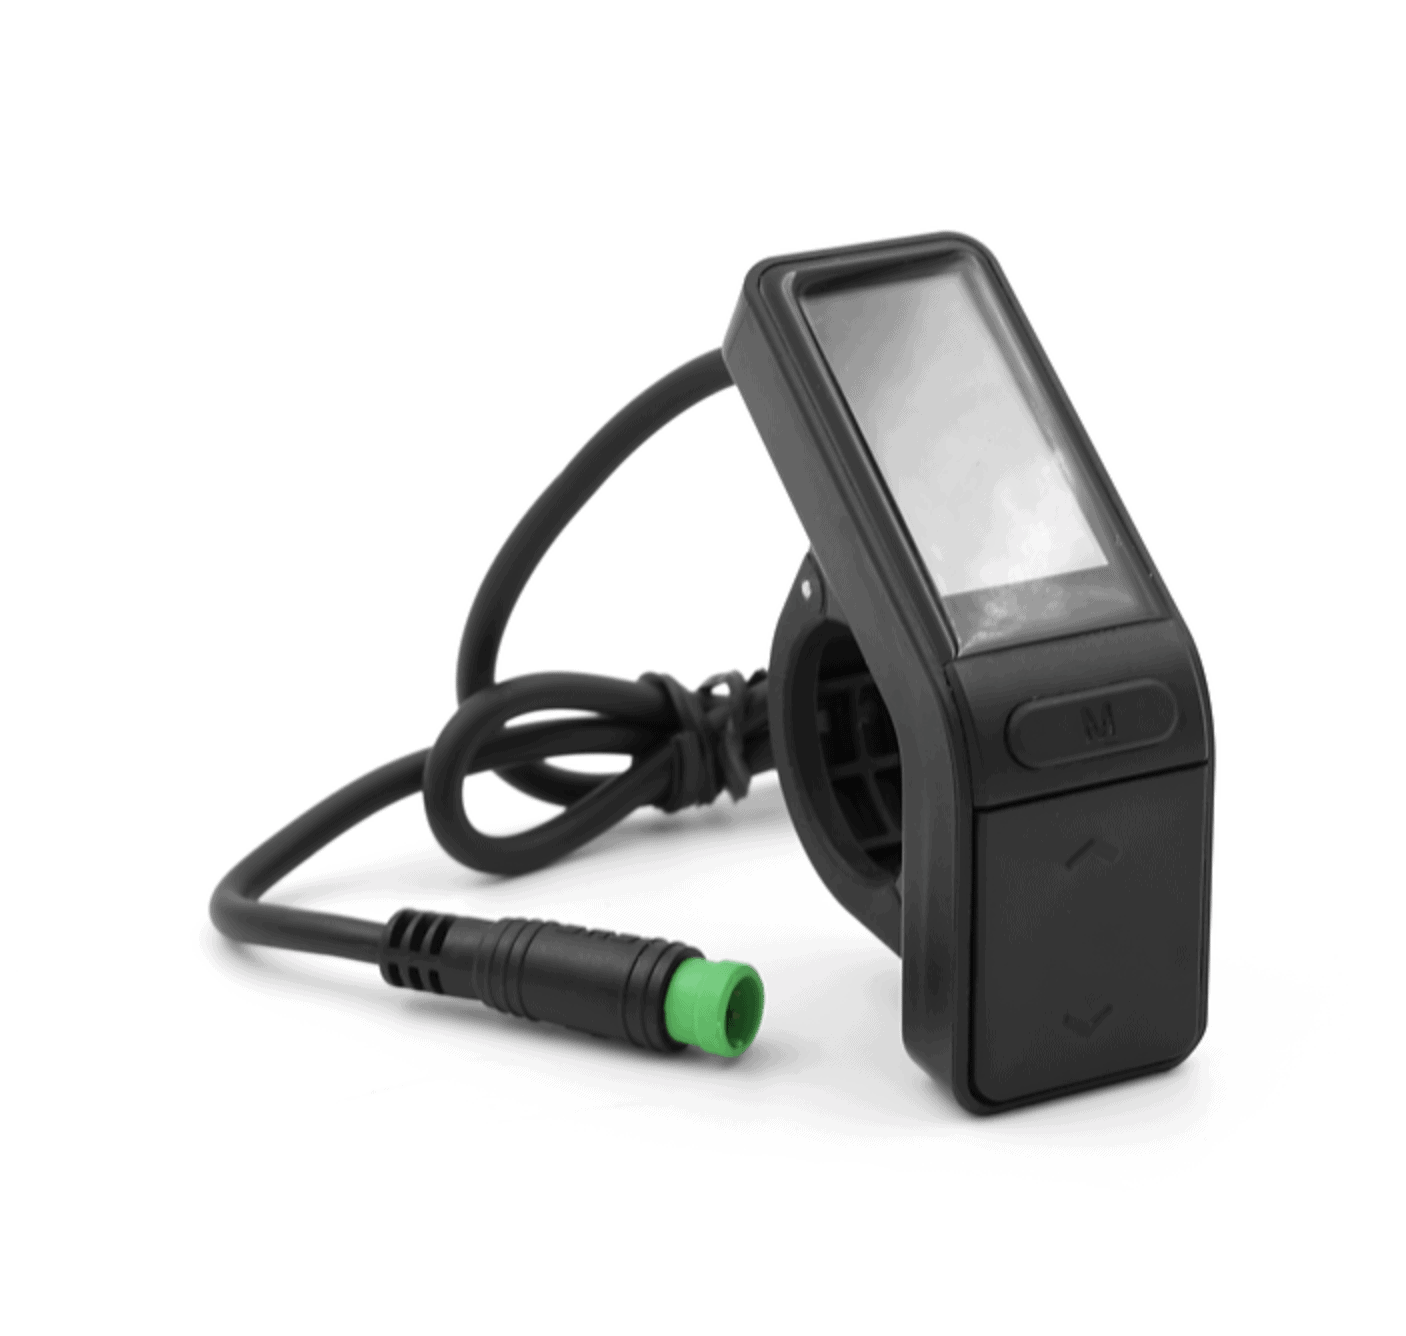 A black device with green light on it.